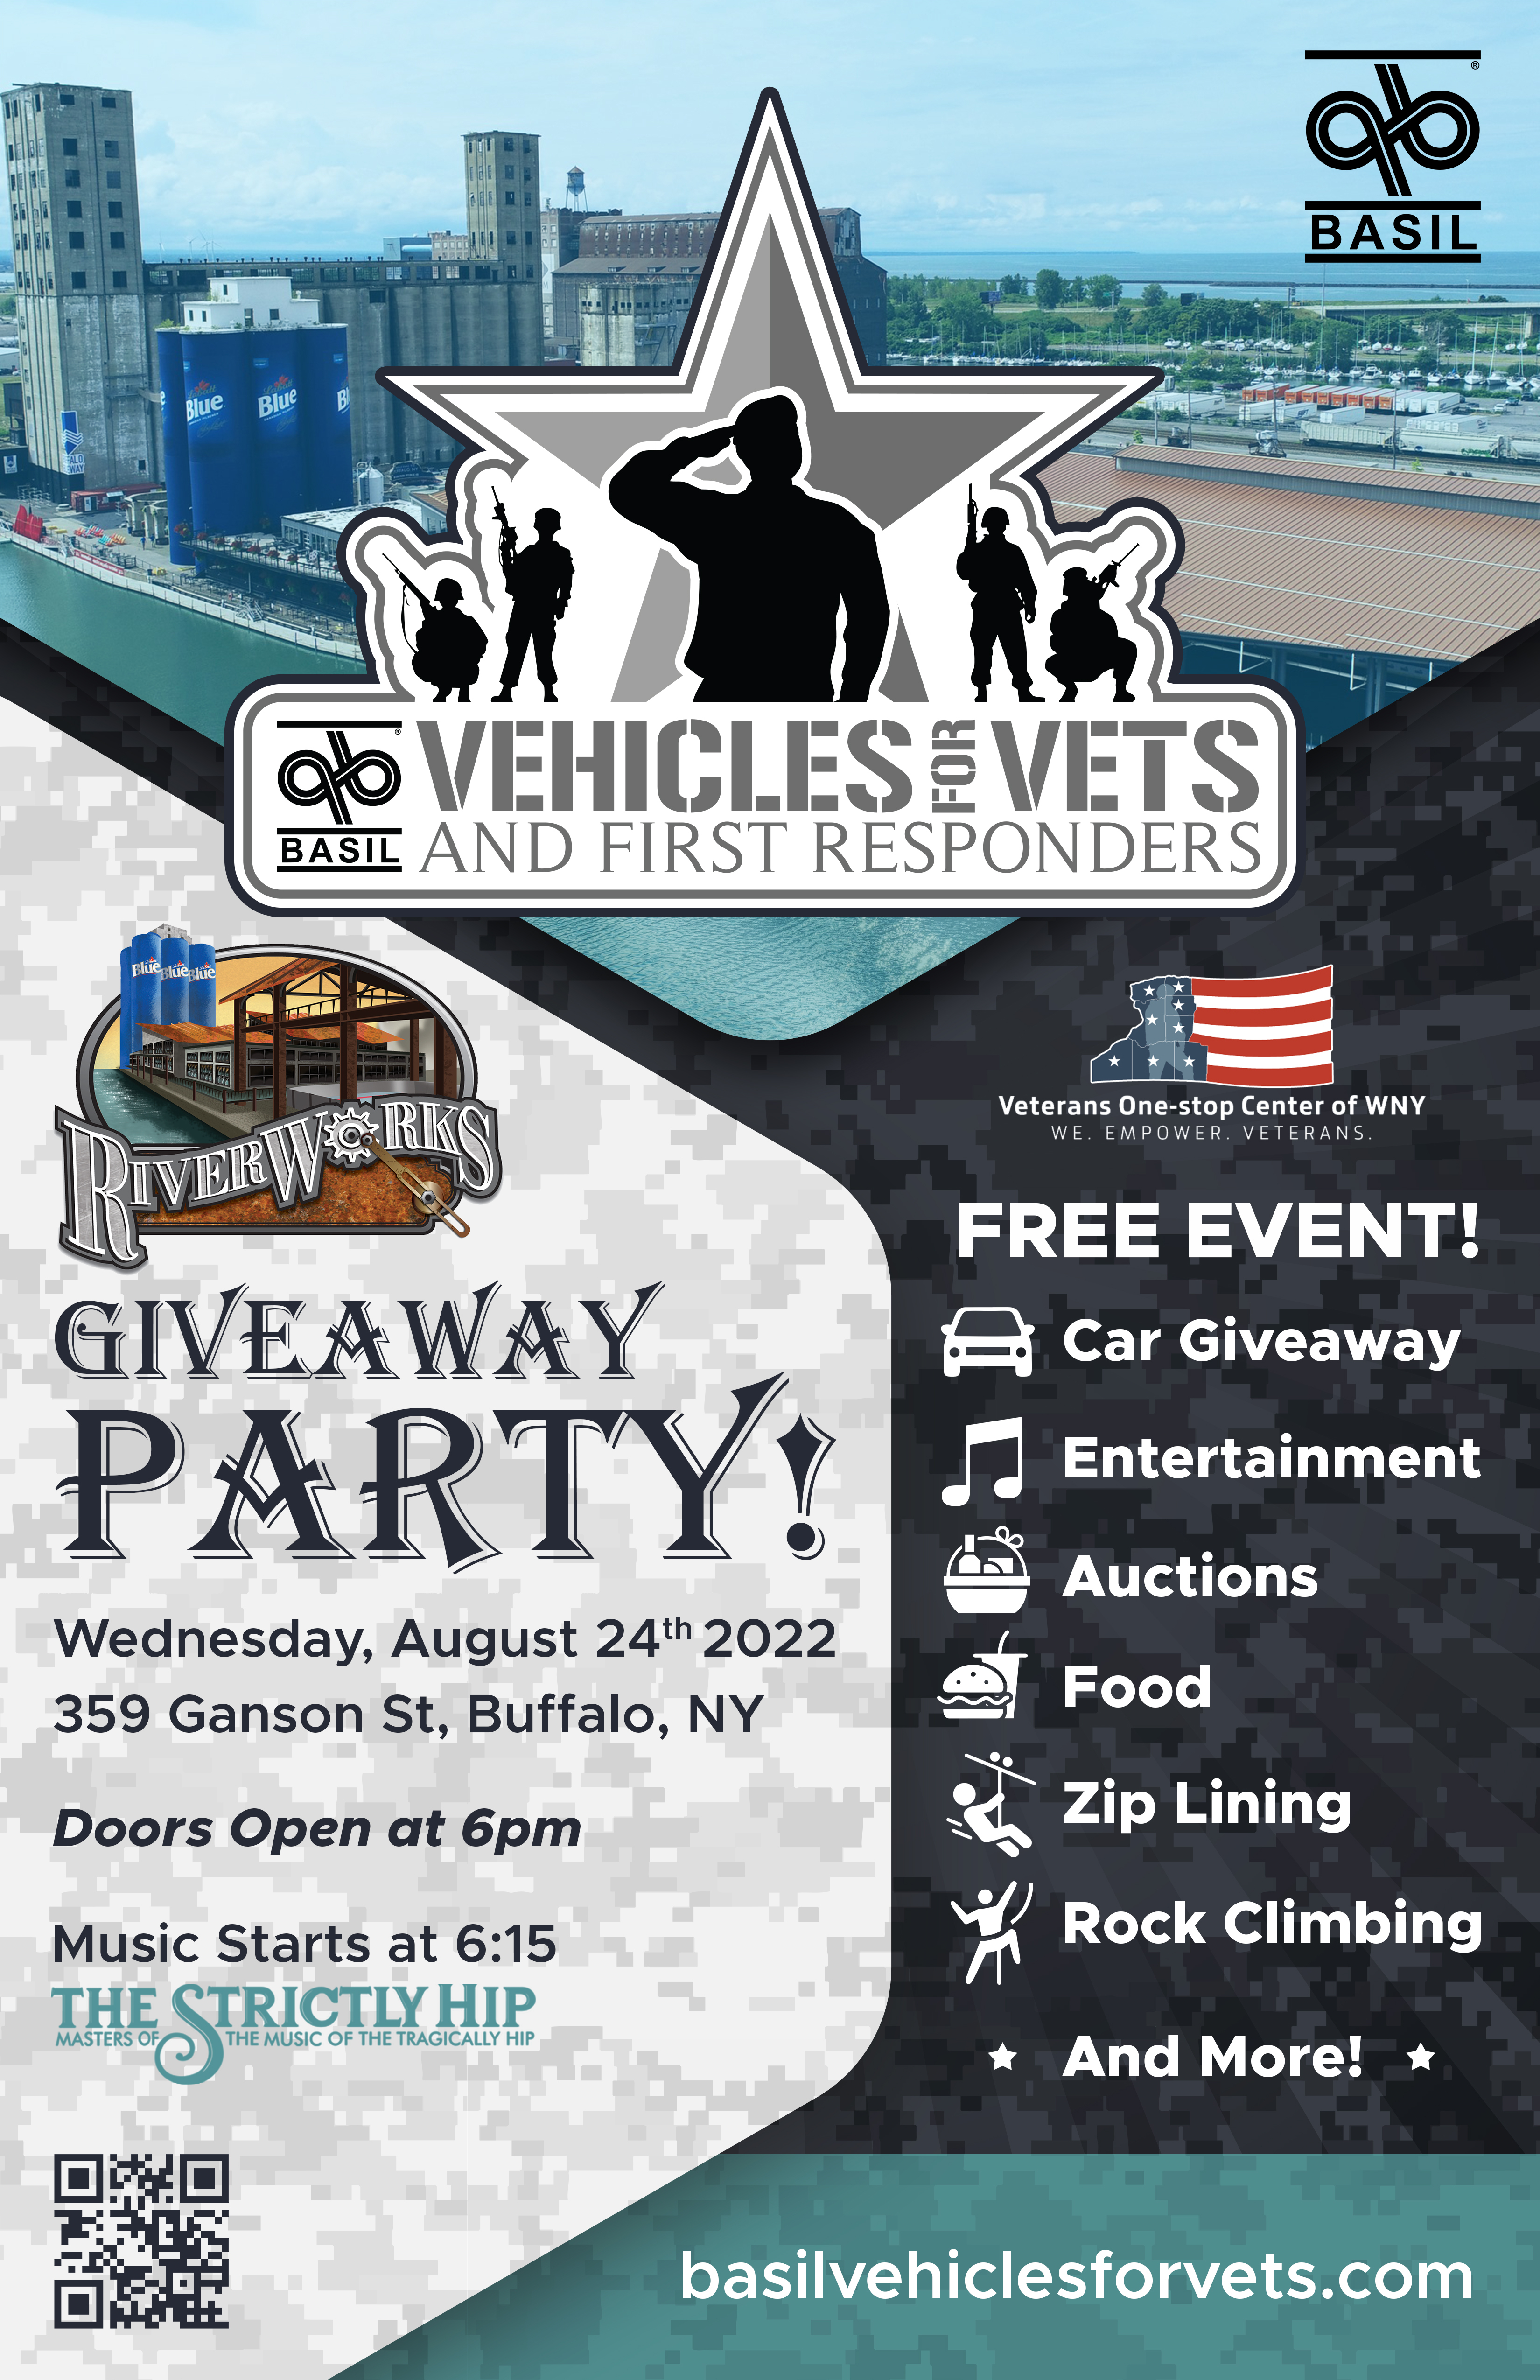 Vehicles for Vets and First Responders Event Details